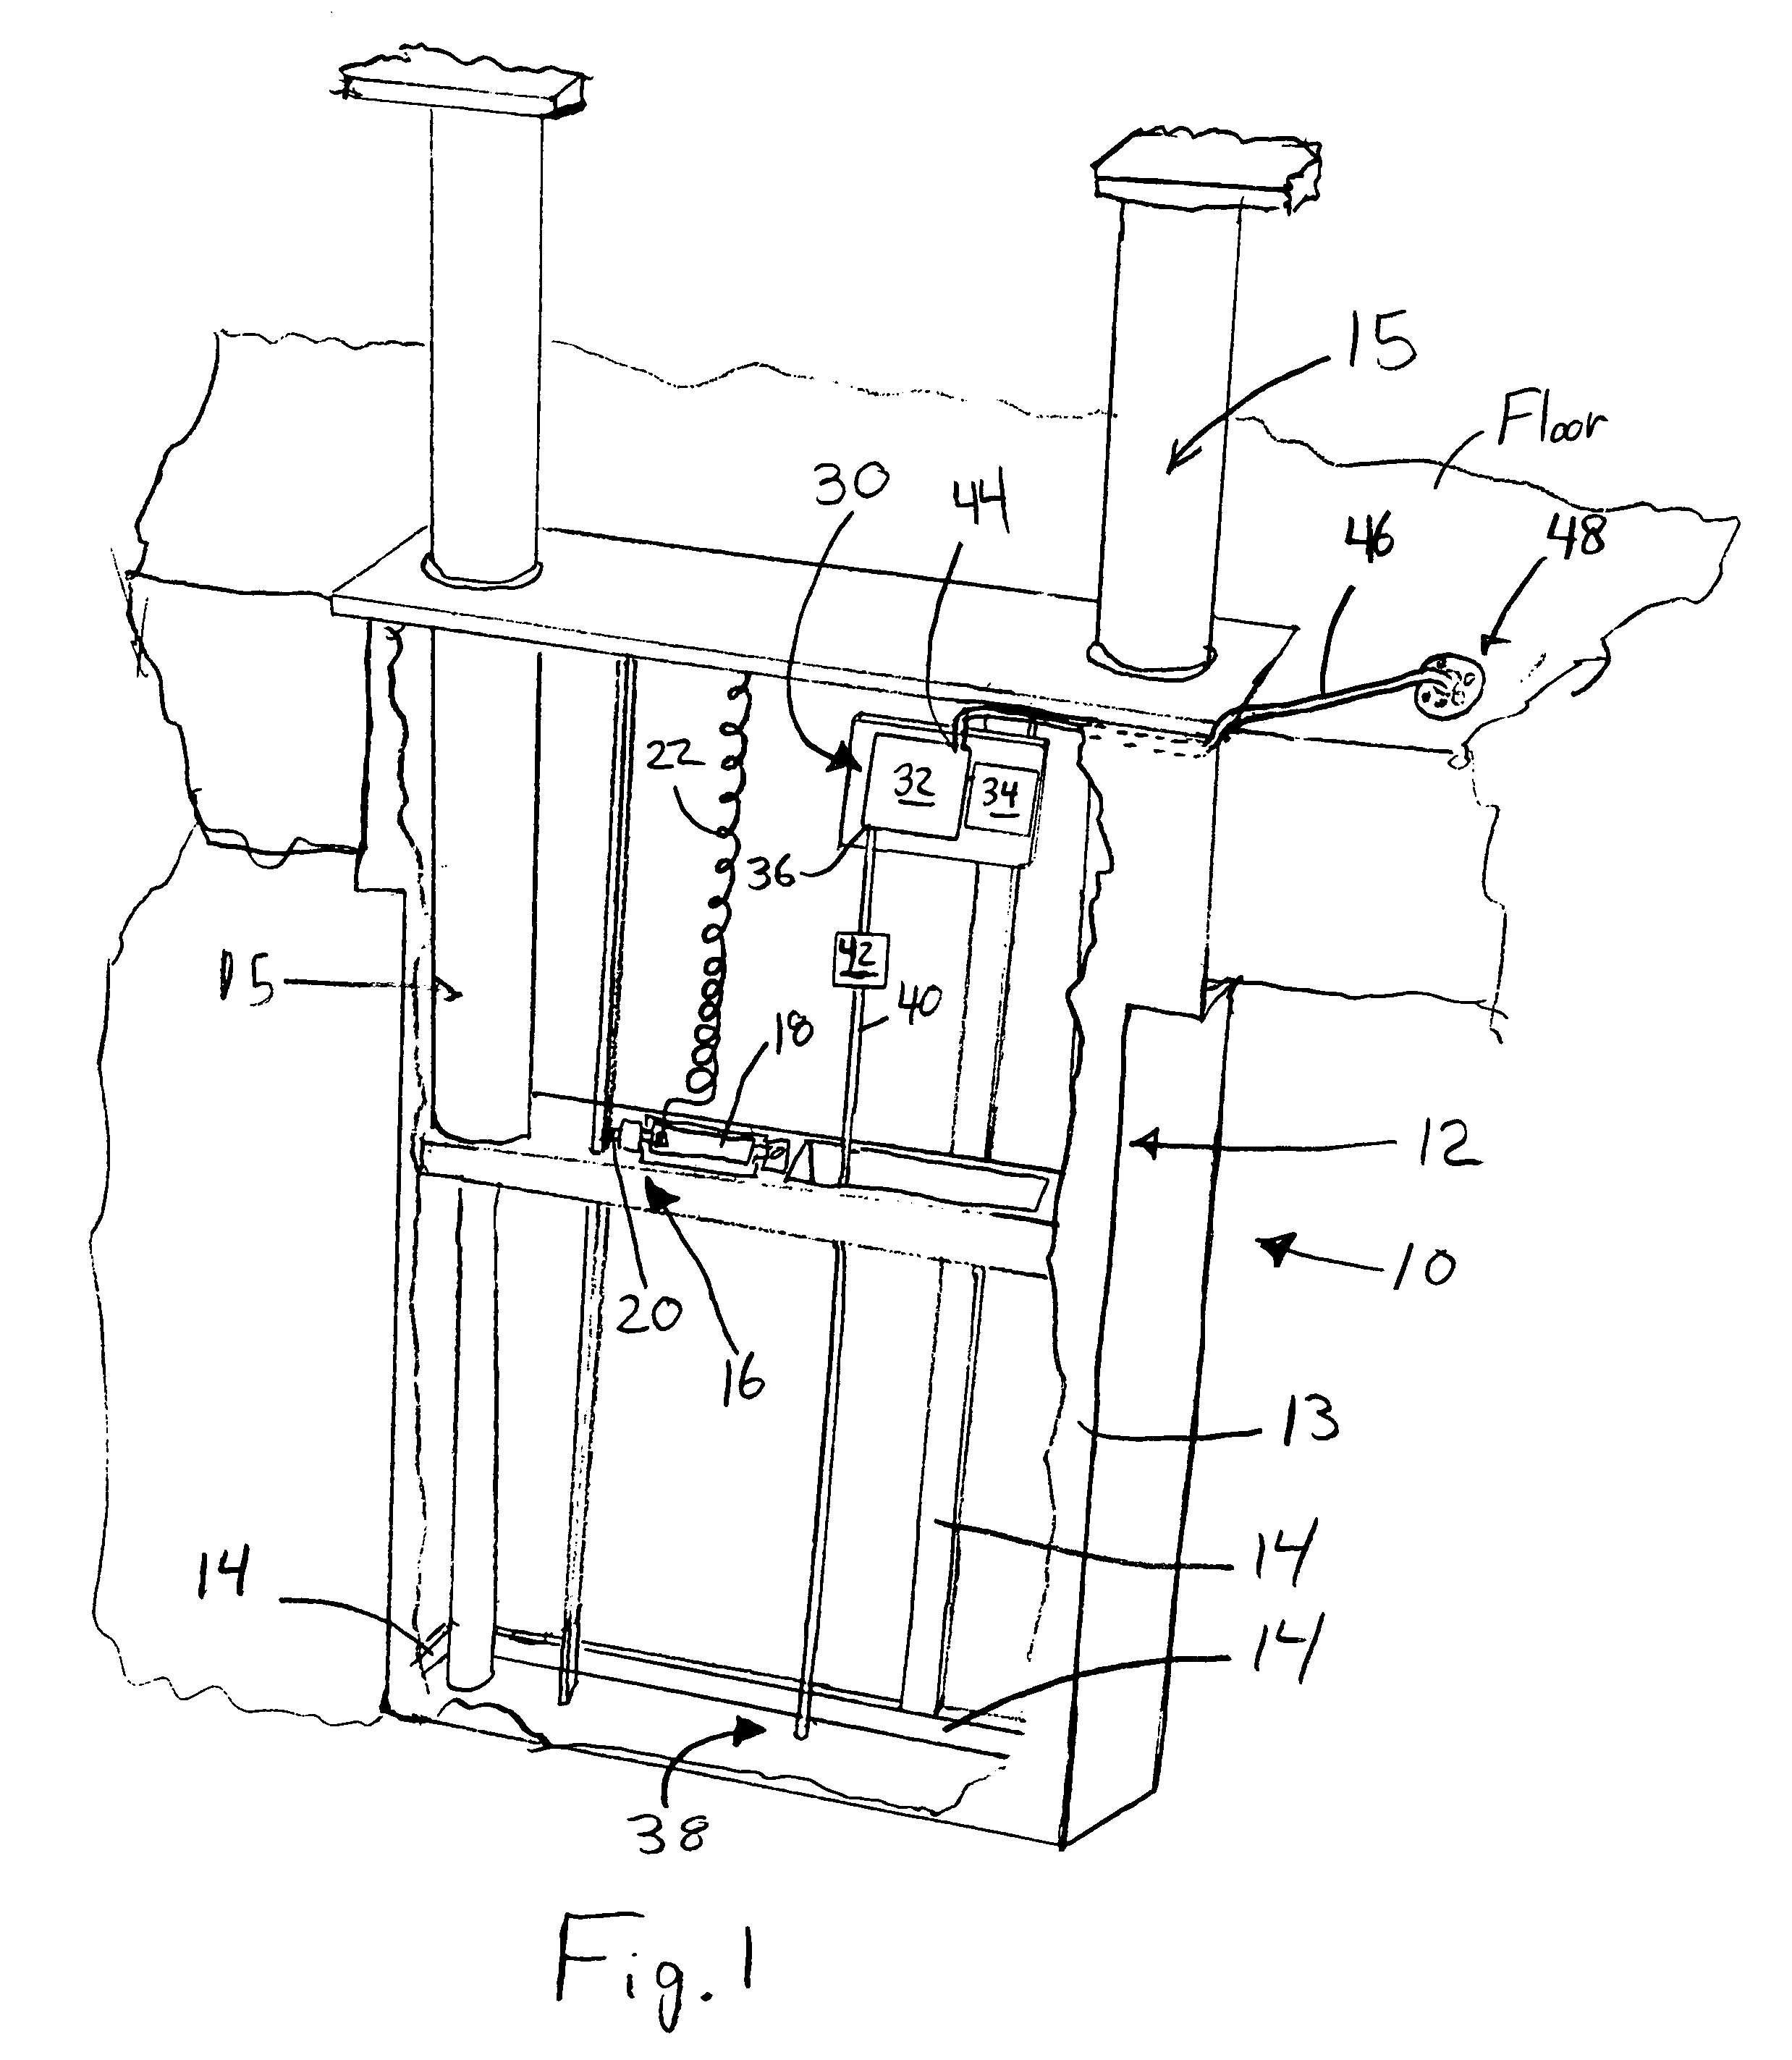 Condensate scavenging system and method for in-ground vehicle lifts